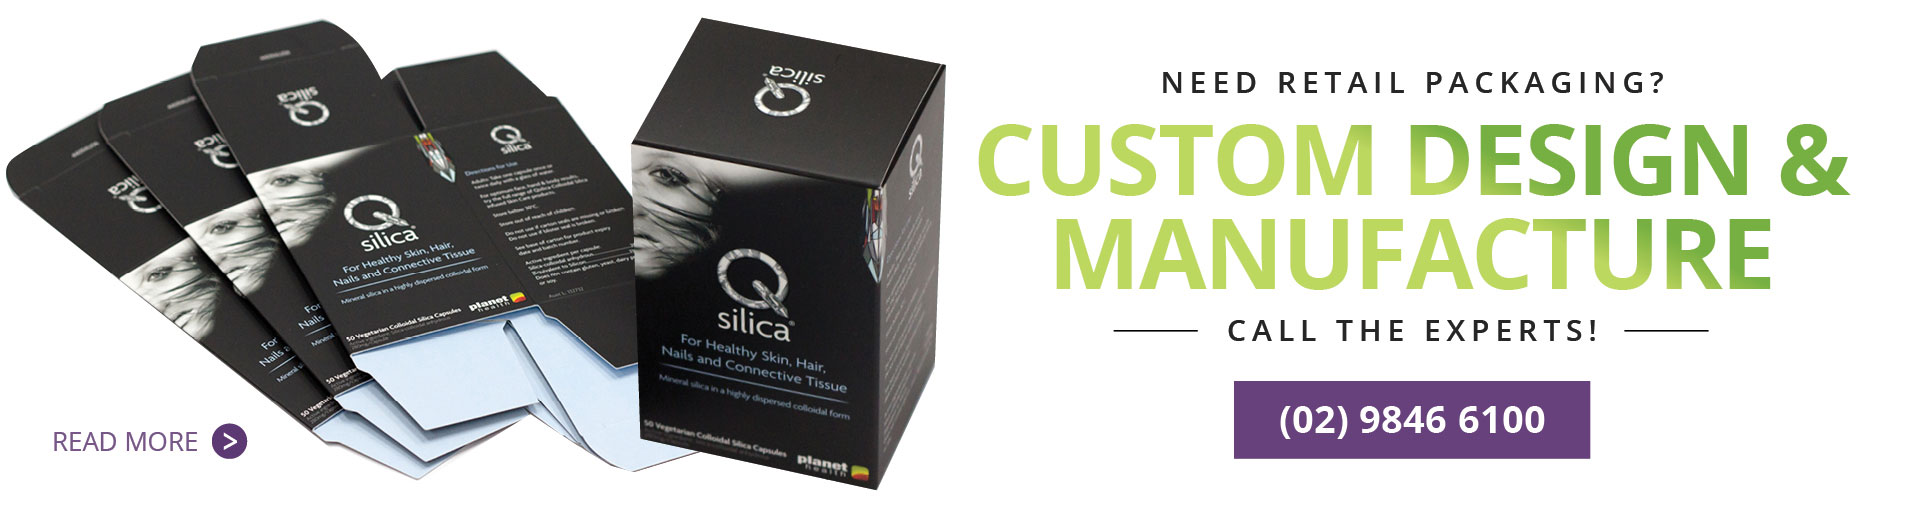 Need Retail Packaging? Custom Design & Manufacture // Read more